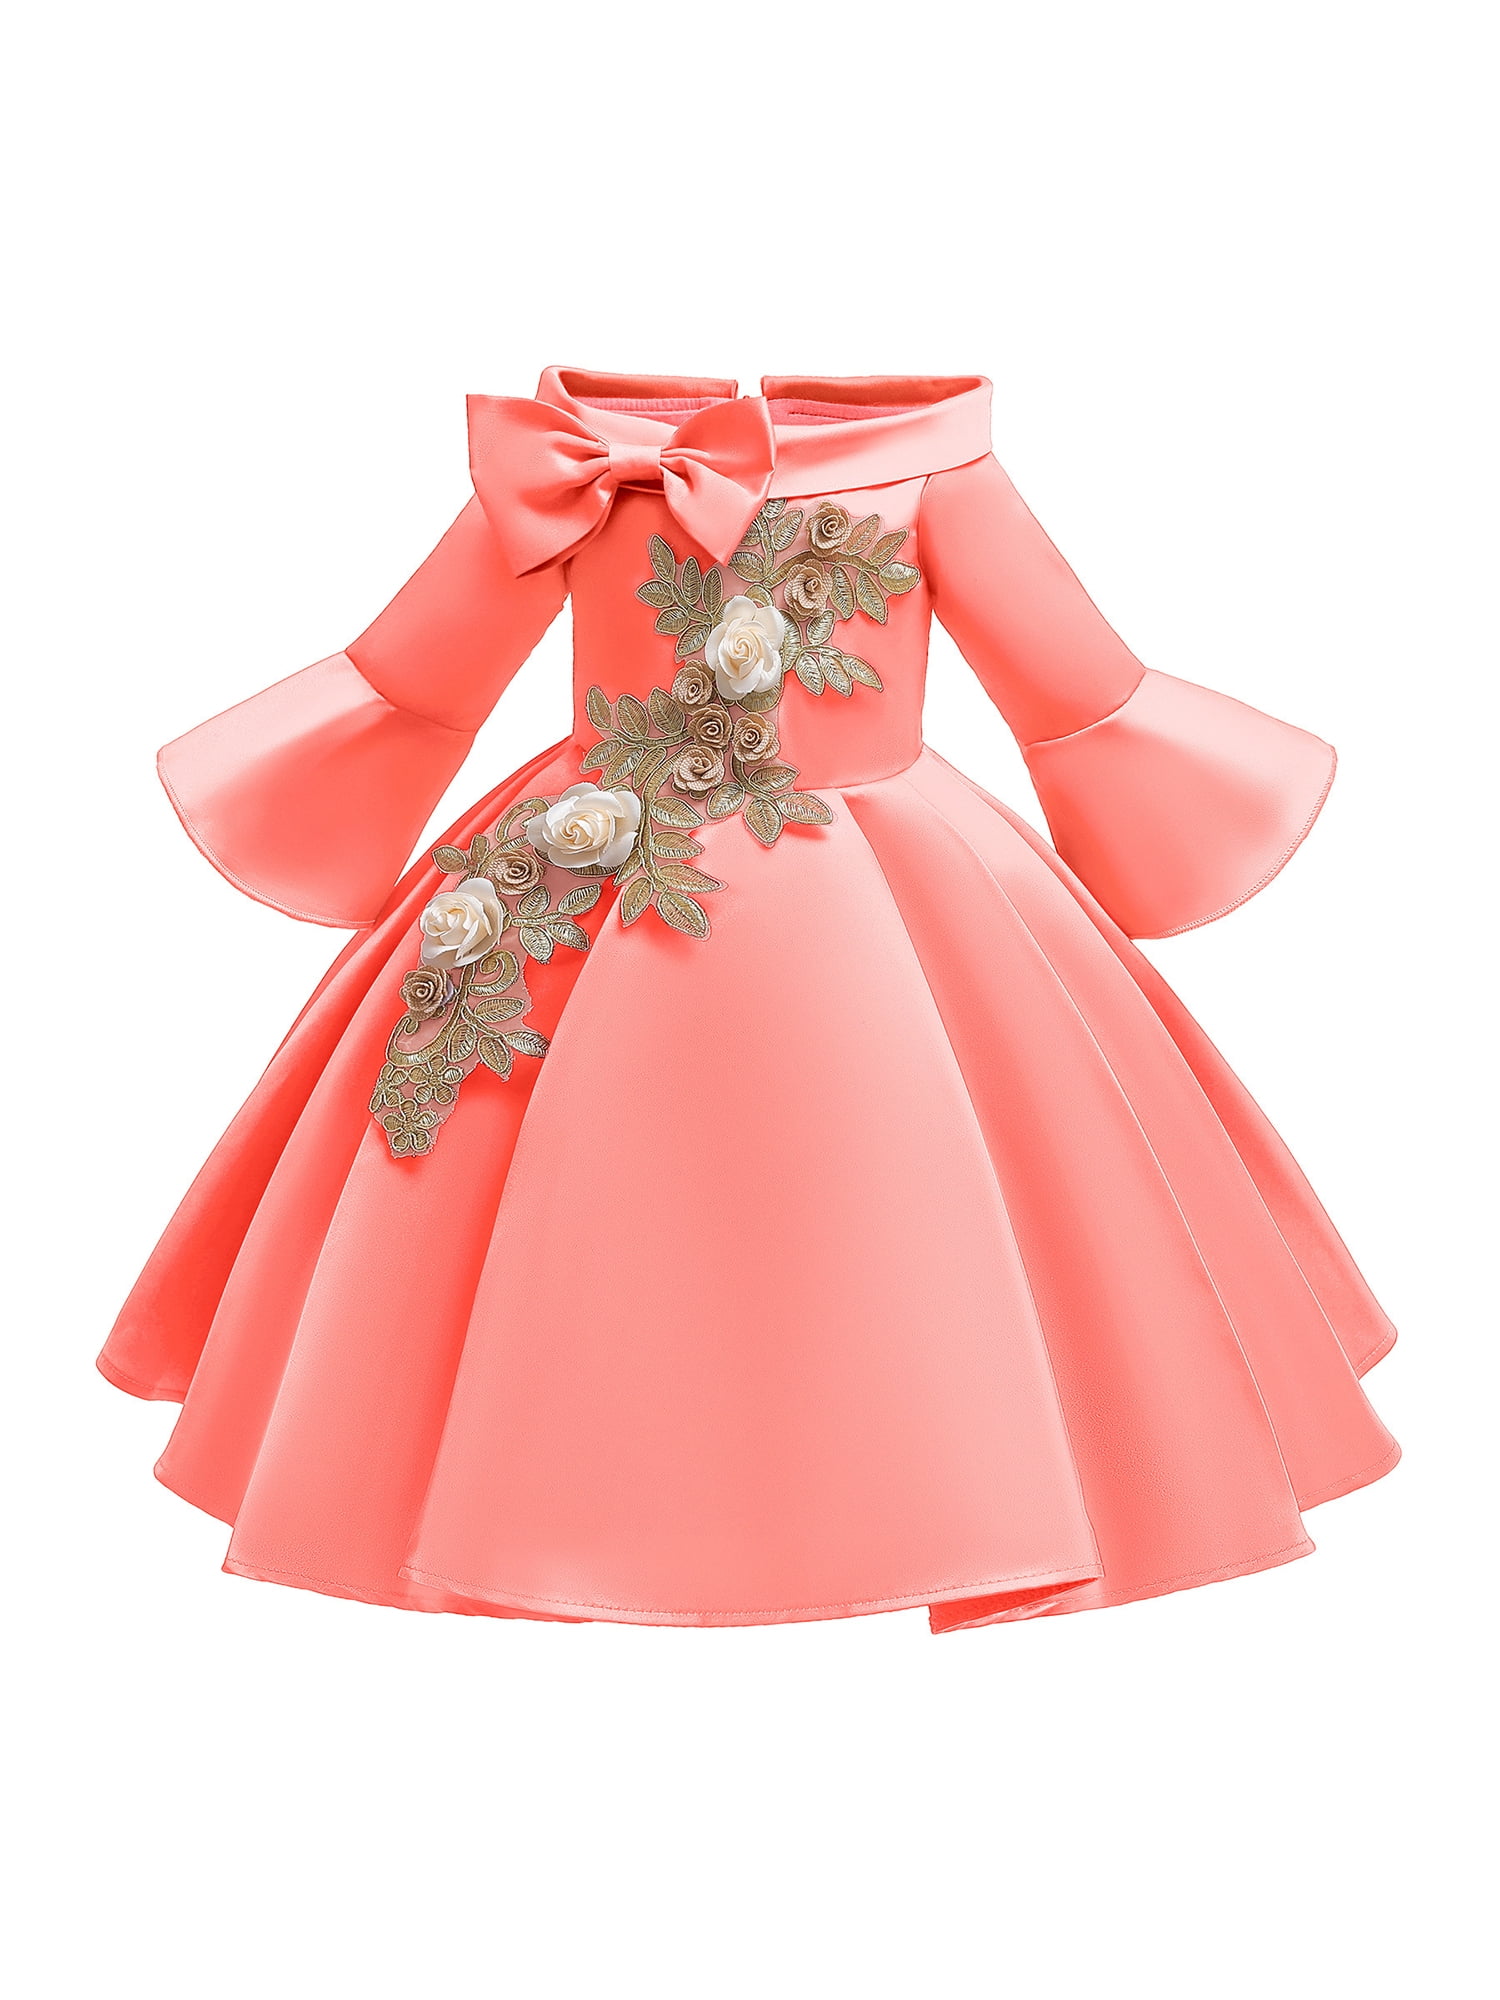 Flower Girl Princess Dress Kids Water-soluble Lace Gown Birthday Wedding Dresses